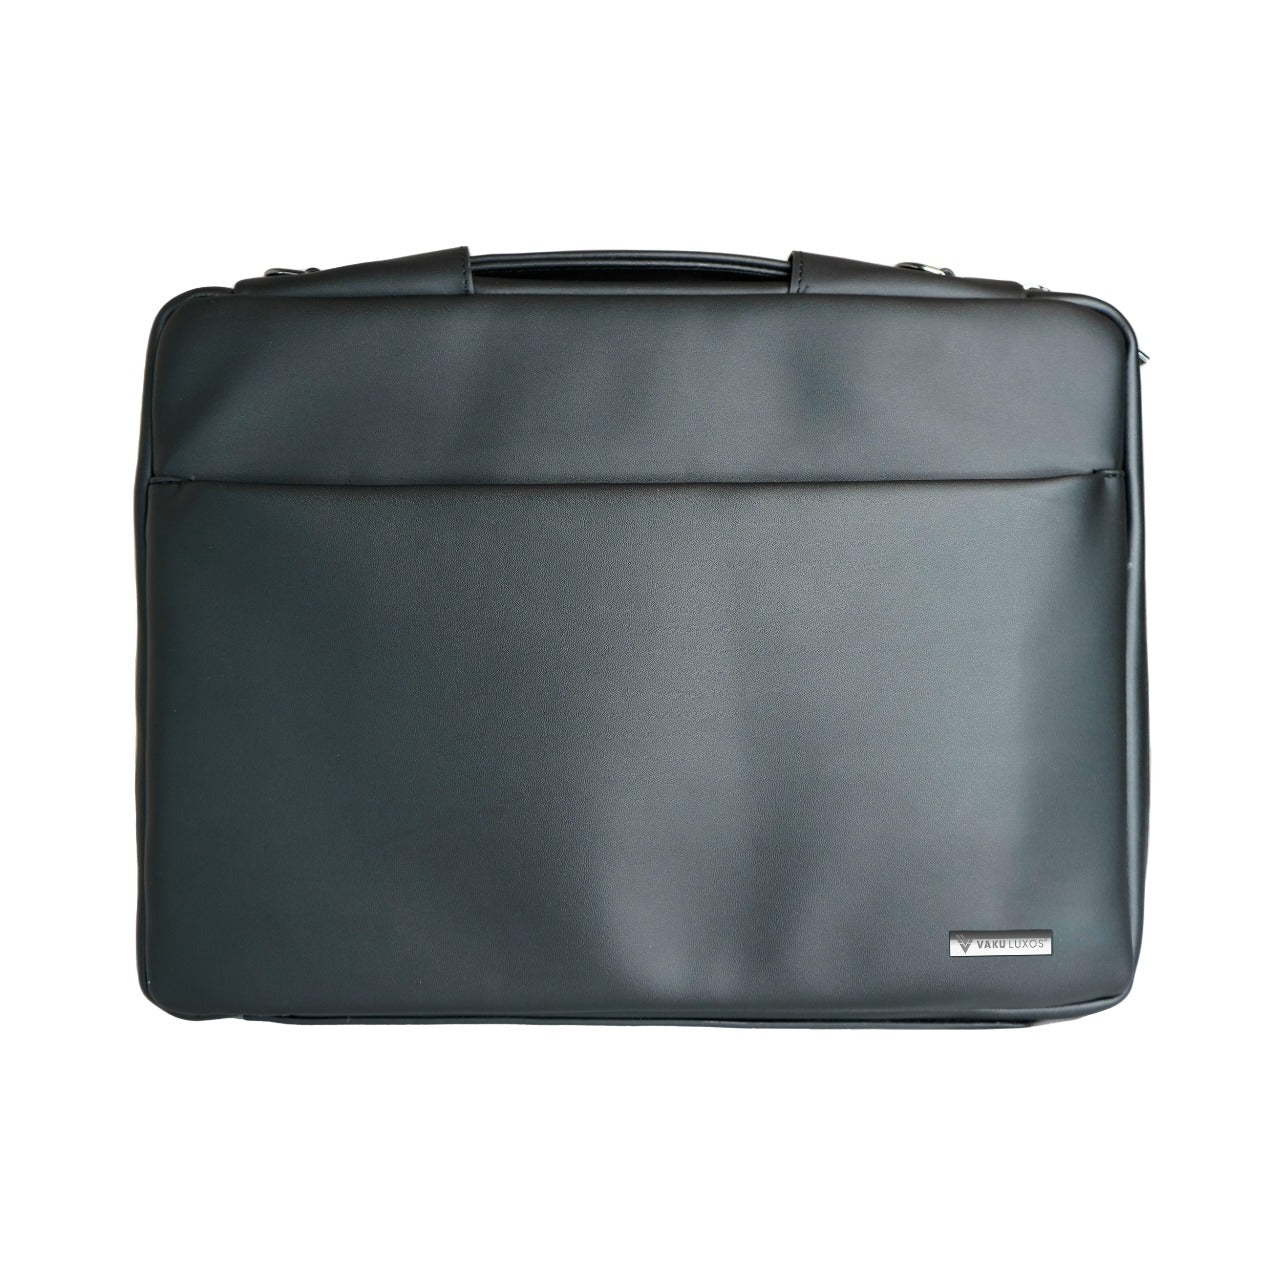 Vaku Luxos DA Valencia Leather Sleeve with Strap - Protect Your MacBook in Style